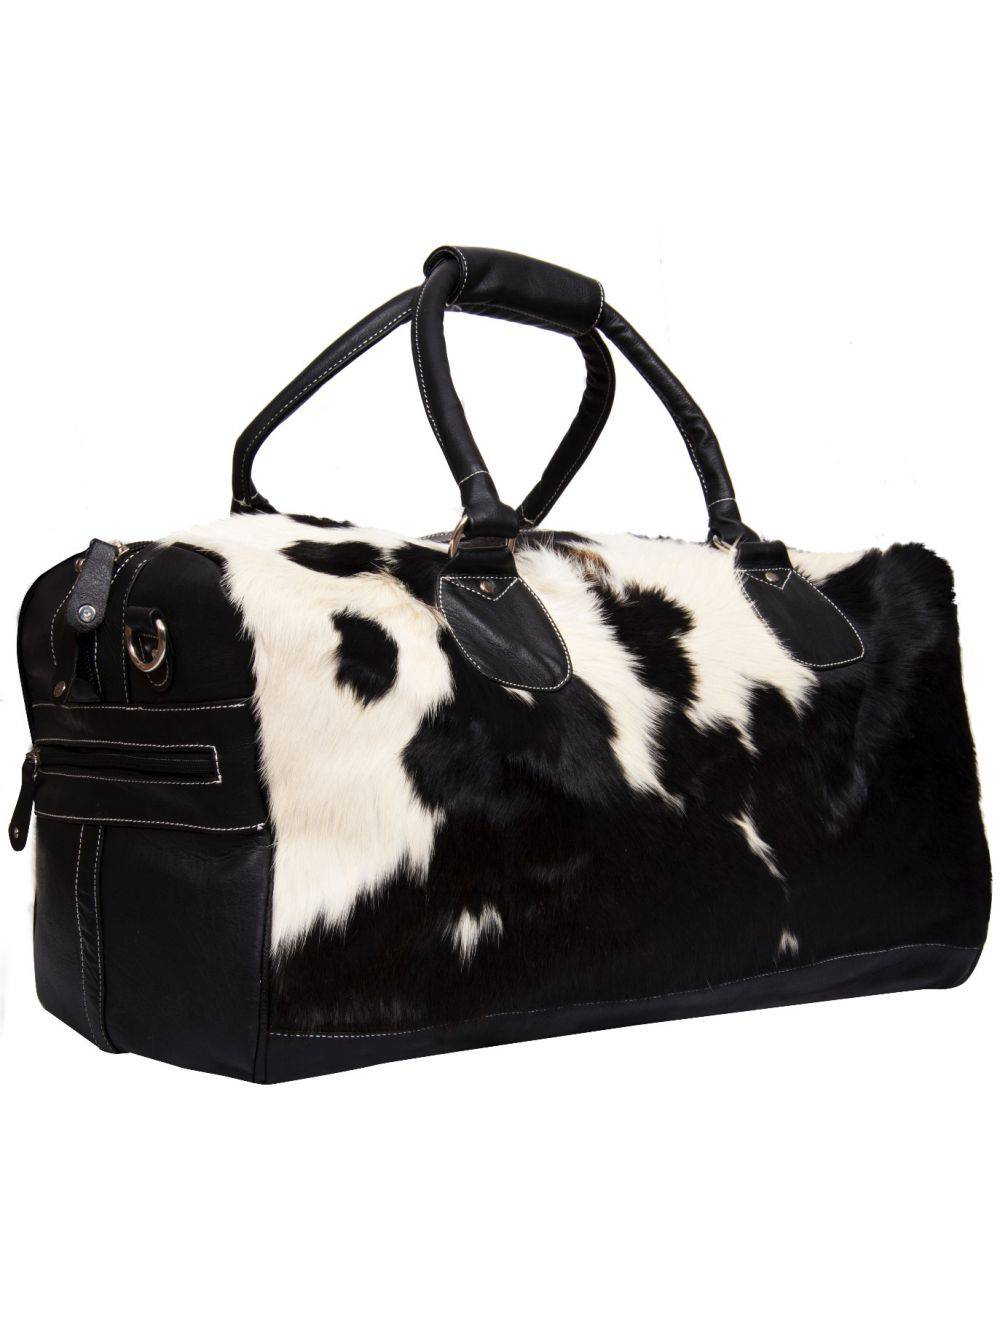 Black Cowhide Leather Weekend Bag for sale - Woodcock and Cavendish